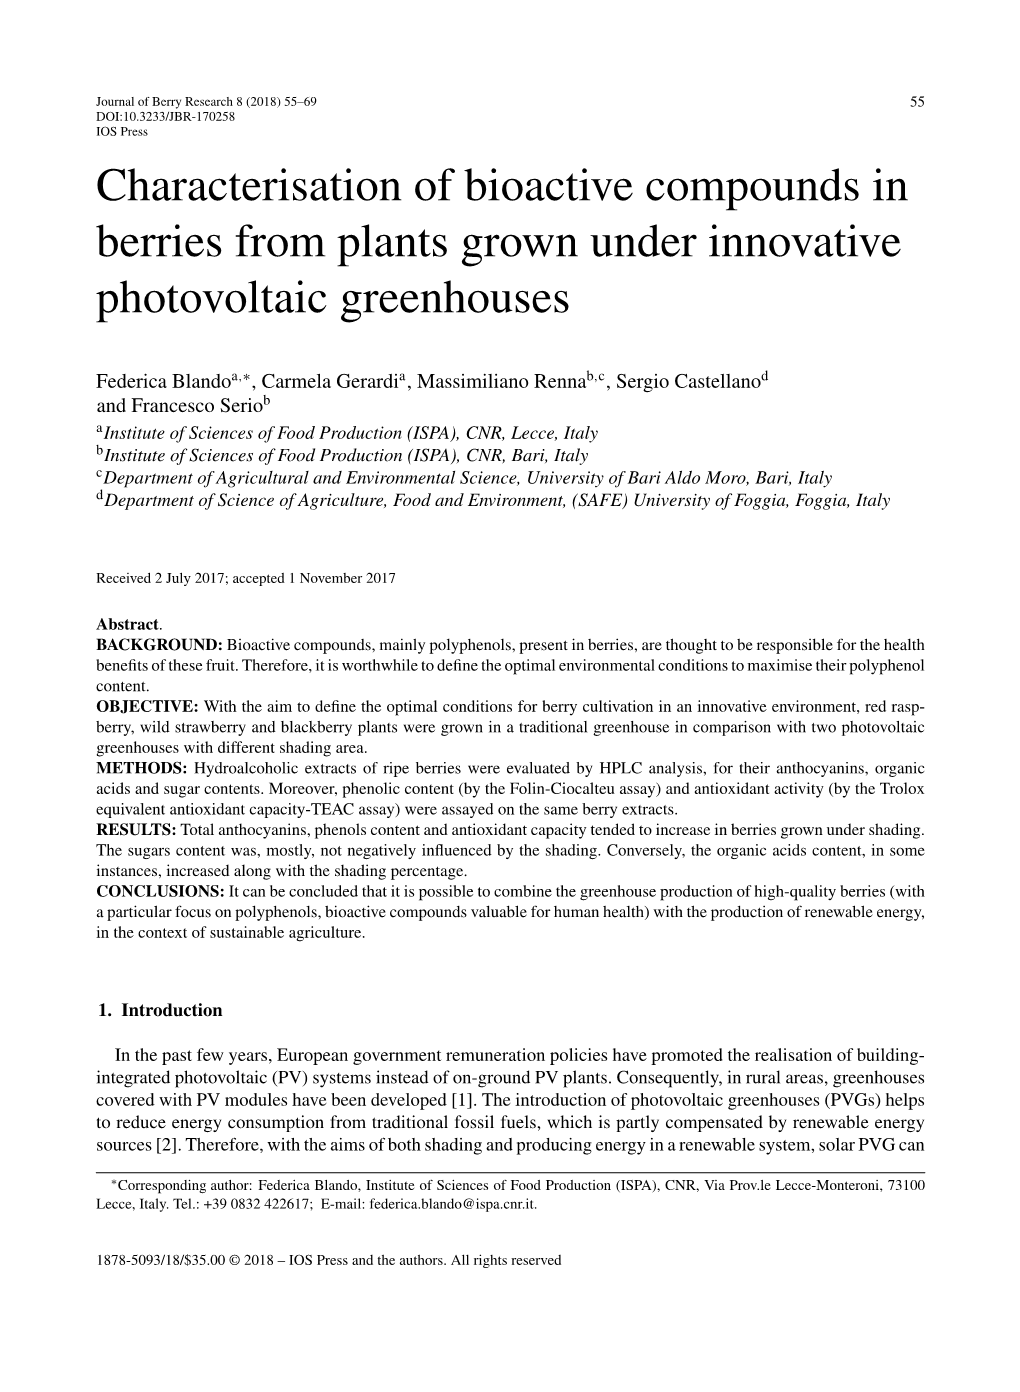 Characterisation of Bioactive Compounds in Berries from Plants Grown Under Innovative Photovoltaic Greenhouses